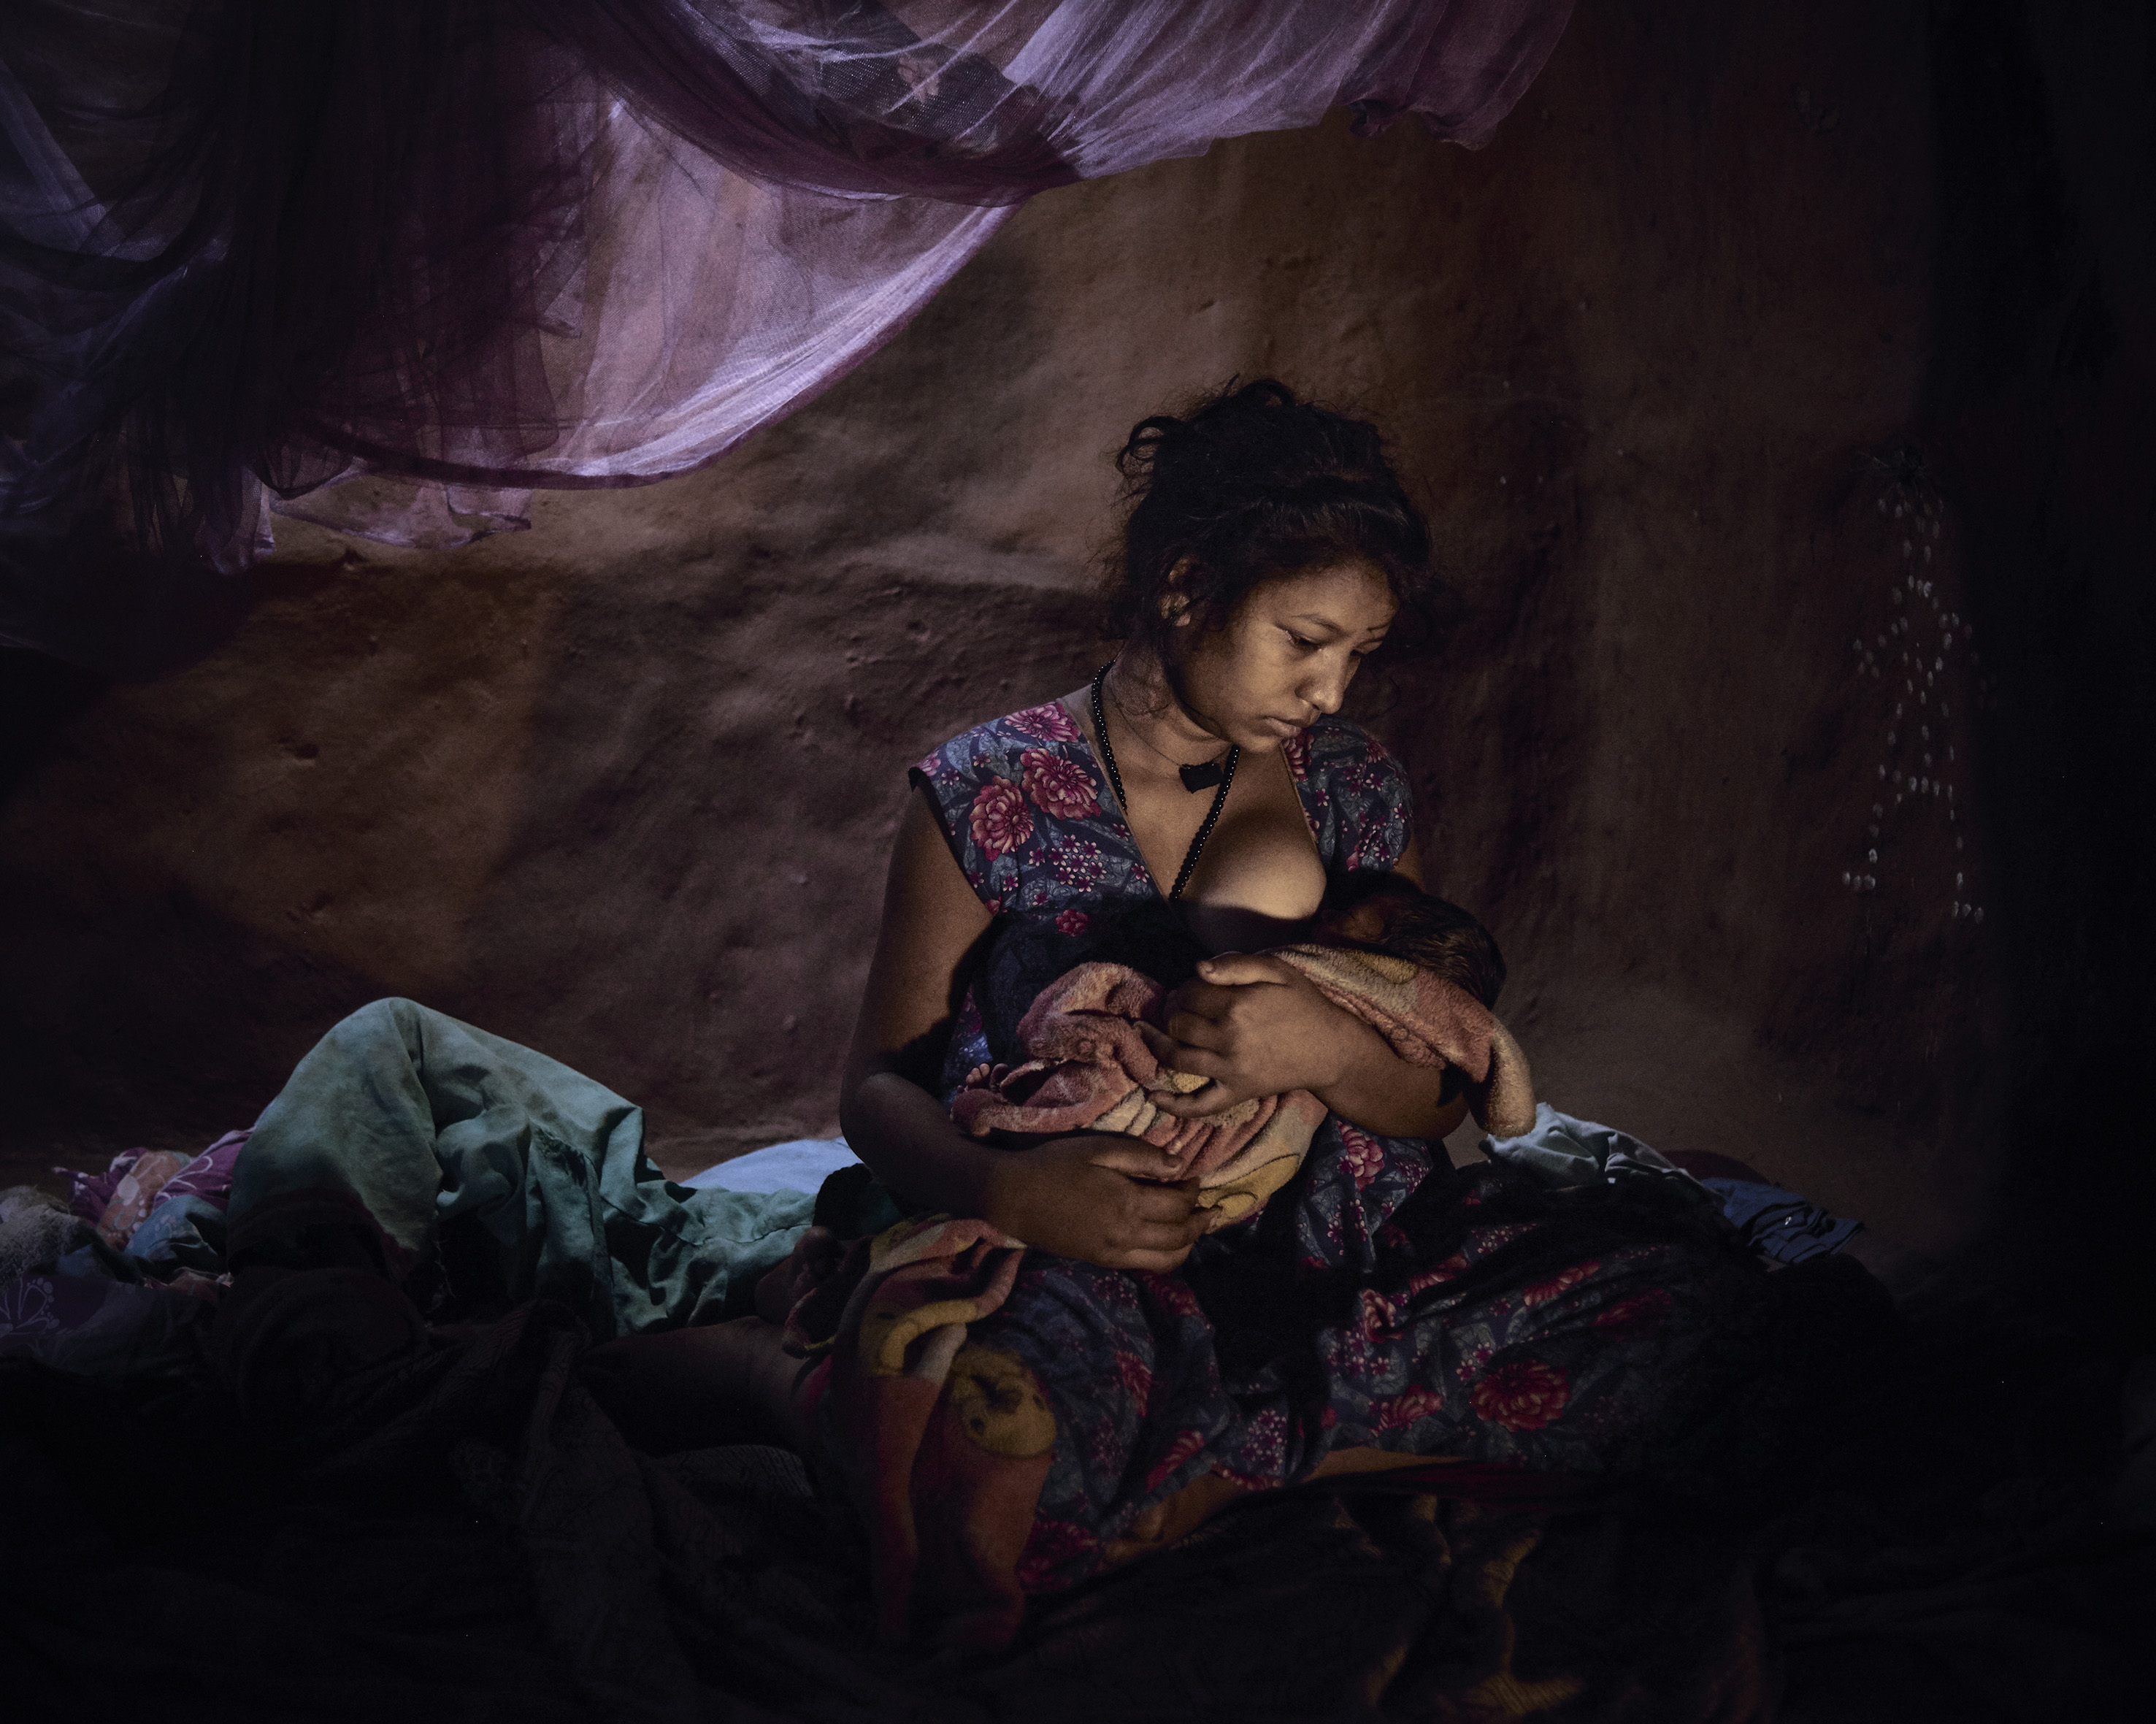 Saraswati, 16, must live in a closed dark room with her baby because she bled after childbirth. (Poulomi Basu)